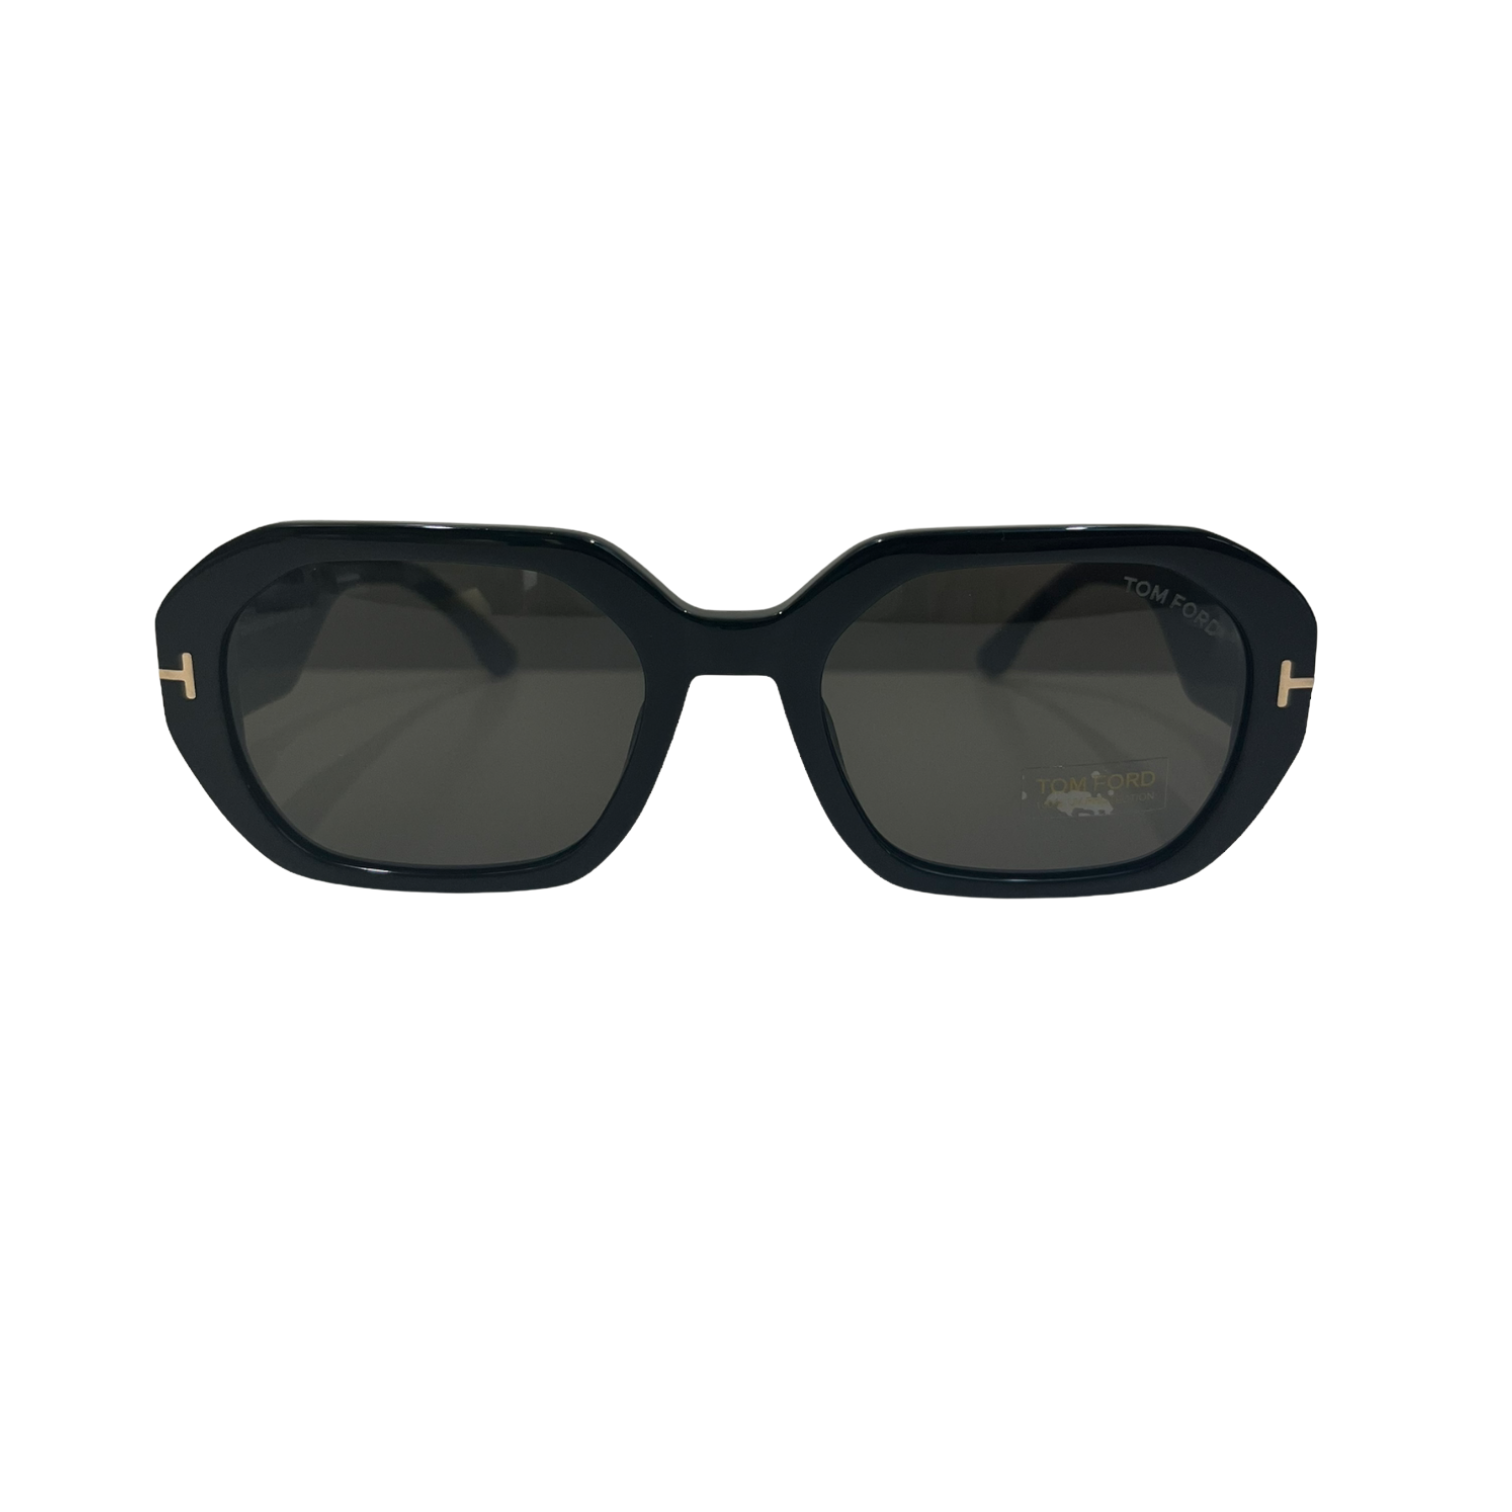 TOM FORD TF917 01A | Super Face